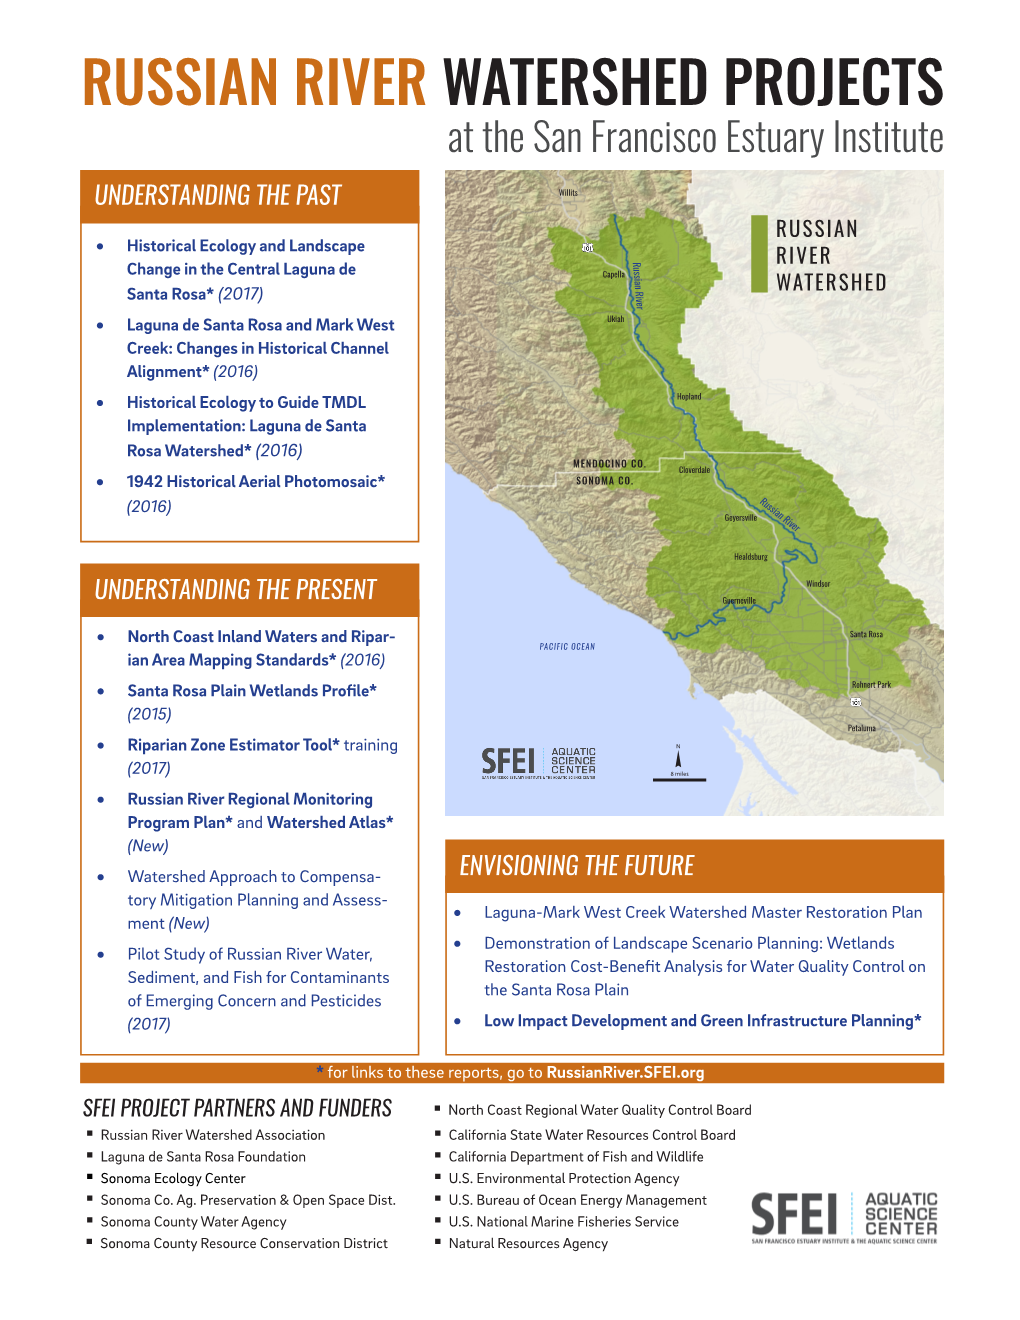 RUSSIAN RIVER WATERSHED PROJECTS at the San Francisco Estuary Institute